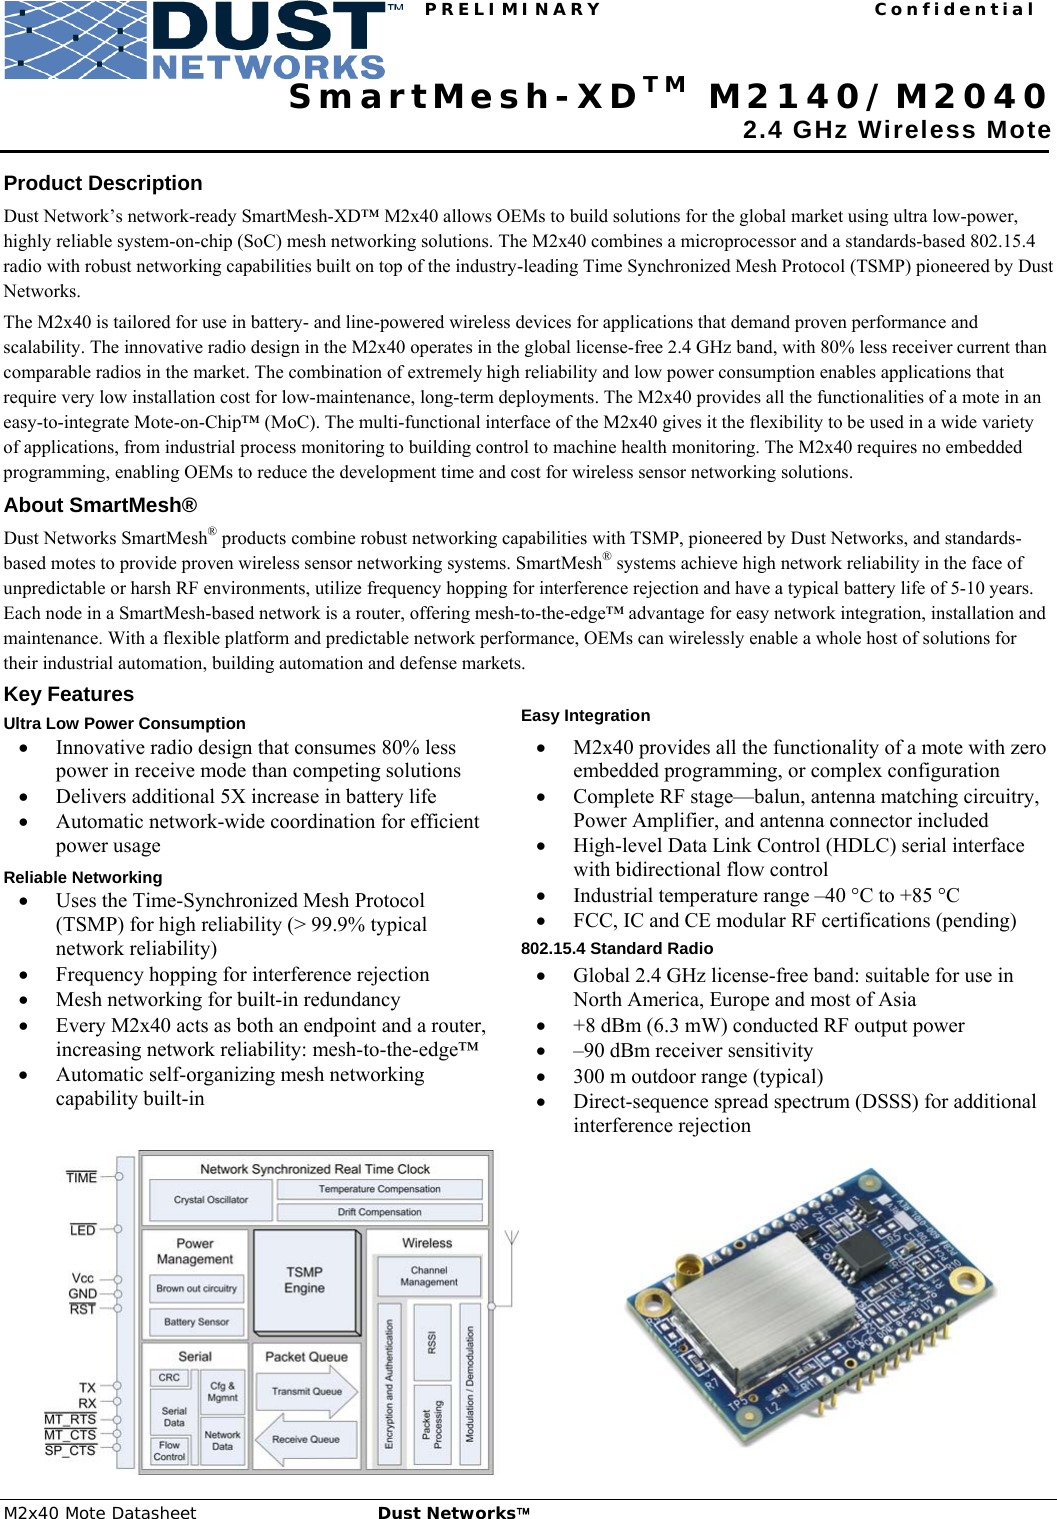 PRELIMINARY Confidential M2x40 Mote Datasheet  Dust Networks™ 1         SmartMesh-XDTM M2140/M2040  2.4 GHz Wireless Mote  Product Description Dust Network’s network-ready SmartMesh-XD™ M2x40 allows OEMs to build solutions for the global market using ultra low-power, highly reliable system-on-chip (SoC) mesh networking solutions. The M2x40 combines a microprocessor and a standards-based 802.15.4 radio with robust networking capabilities built on top of the industry-leading Time Synchronized Mesh Protocol (TSMP) pioneered by Dust Networks.  The M2x40 is tailored for use in battery- and line-powered wireless devices for applications that demand proven performance and scalability. The innovative radio design in the M2x40 operates in the global license-free 2.4 GHz band, with 80% less receiver current than comparable radios in the market. The combination of extremely high reliability and low power consumption enables applications that require very low installation cost for low-maintenance, long-term deployments. The M2x40 provides all the functionalities of a mote in an easy-to-integrate Mote-on-Chip™ (MoC). The multi-functional interface of the M2x40 gives it the flexibility to be used in a wide variety of applications, from industrial process monitoring to building control to machine health monitoring. The M2x40 requires no embedded programming, enabling OEMs to reduce the development time and cost for wireless sensor networking solutions. About SmartMesh® Dust Networks SmartMesh® products combine robust networking capabilities with TSMP, pioneered by Dust Networks, and standards-based motes to provide proven wireless sensor networking systems. SmartMesh® systems achieve high network reliability in the face of unpredictable or harsh RF environments, utilize frequency hopping for interference rejection and have a typical battery life of 5-10 years. Each node in a SmartMesh-based network is a router, offering mesh-to-the-edge™ advantage for easy network integration, installation and maintenance. With a flexible platform and predictable network performance, OEMs can wirelessly enable a whole host of solutions for their industrial automation, building automation and defense markets. Key Features Ultra Low Power Consumption • Innovative radio design that consumes 80% less power in receive mode than competing solutions • Delivers additional 5X increase in battery life • Automatic network-wide coordination for efficient power usage Reliable Networking • Uses the Time-Synchronized Mesh Protocol (TSMP) for high reliability (&gt; 99.9% typical network reliability) • Frequency hopping for interference rejection • Mesh networking for built-in redundancy • Every M2x40 acts as both an endpoint and a router, increasing network reliability: mesh-to-the-edge™ • Automatic self-organizing mesh networking capability built-in  Easy Integration • M2x40 provides all the functionality of a mote with zero embedded programming, or complex configuration • Complete RF stage—balun, antenna matching circuitry, Power Amplifier, and antenna connector included • High-level Data Link Control (HDLC) serial interface with bidirectional flow control • Industrial temperature range –40 °C to +85 °C • FCC, IC and CE modular RF certifications (pending) 802.15.4 Standard Radio • Global 2.4 GHz license-free band: suitable for use in North America, Europe and most of Asia • +8 dBm (6.3 mW) conducted RF output power  • –90 dBm receiver sensitivity • 300 m outdoor range (typical)  • Direct-sequence spread spectrum (DSSS) for additional interference rejection   